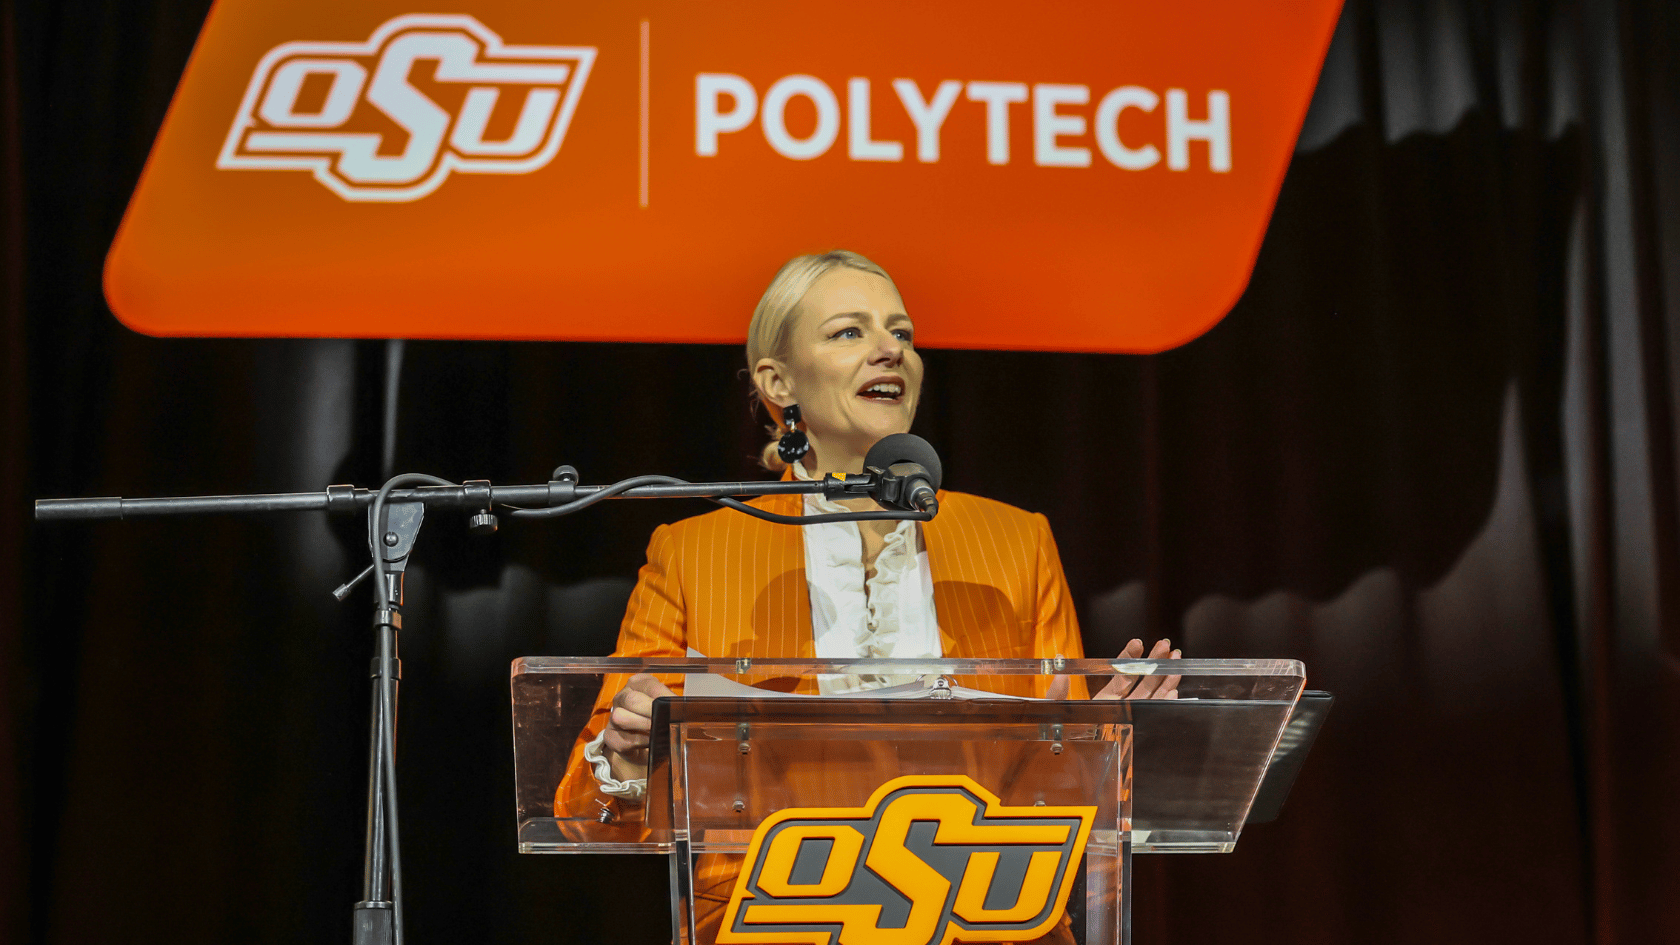 OSUIT’s Industry-Driven Education at the Heart of New OSU Polytech Initiative